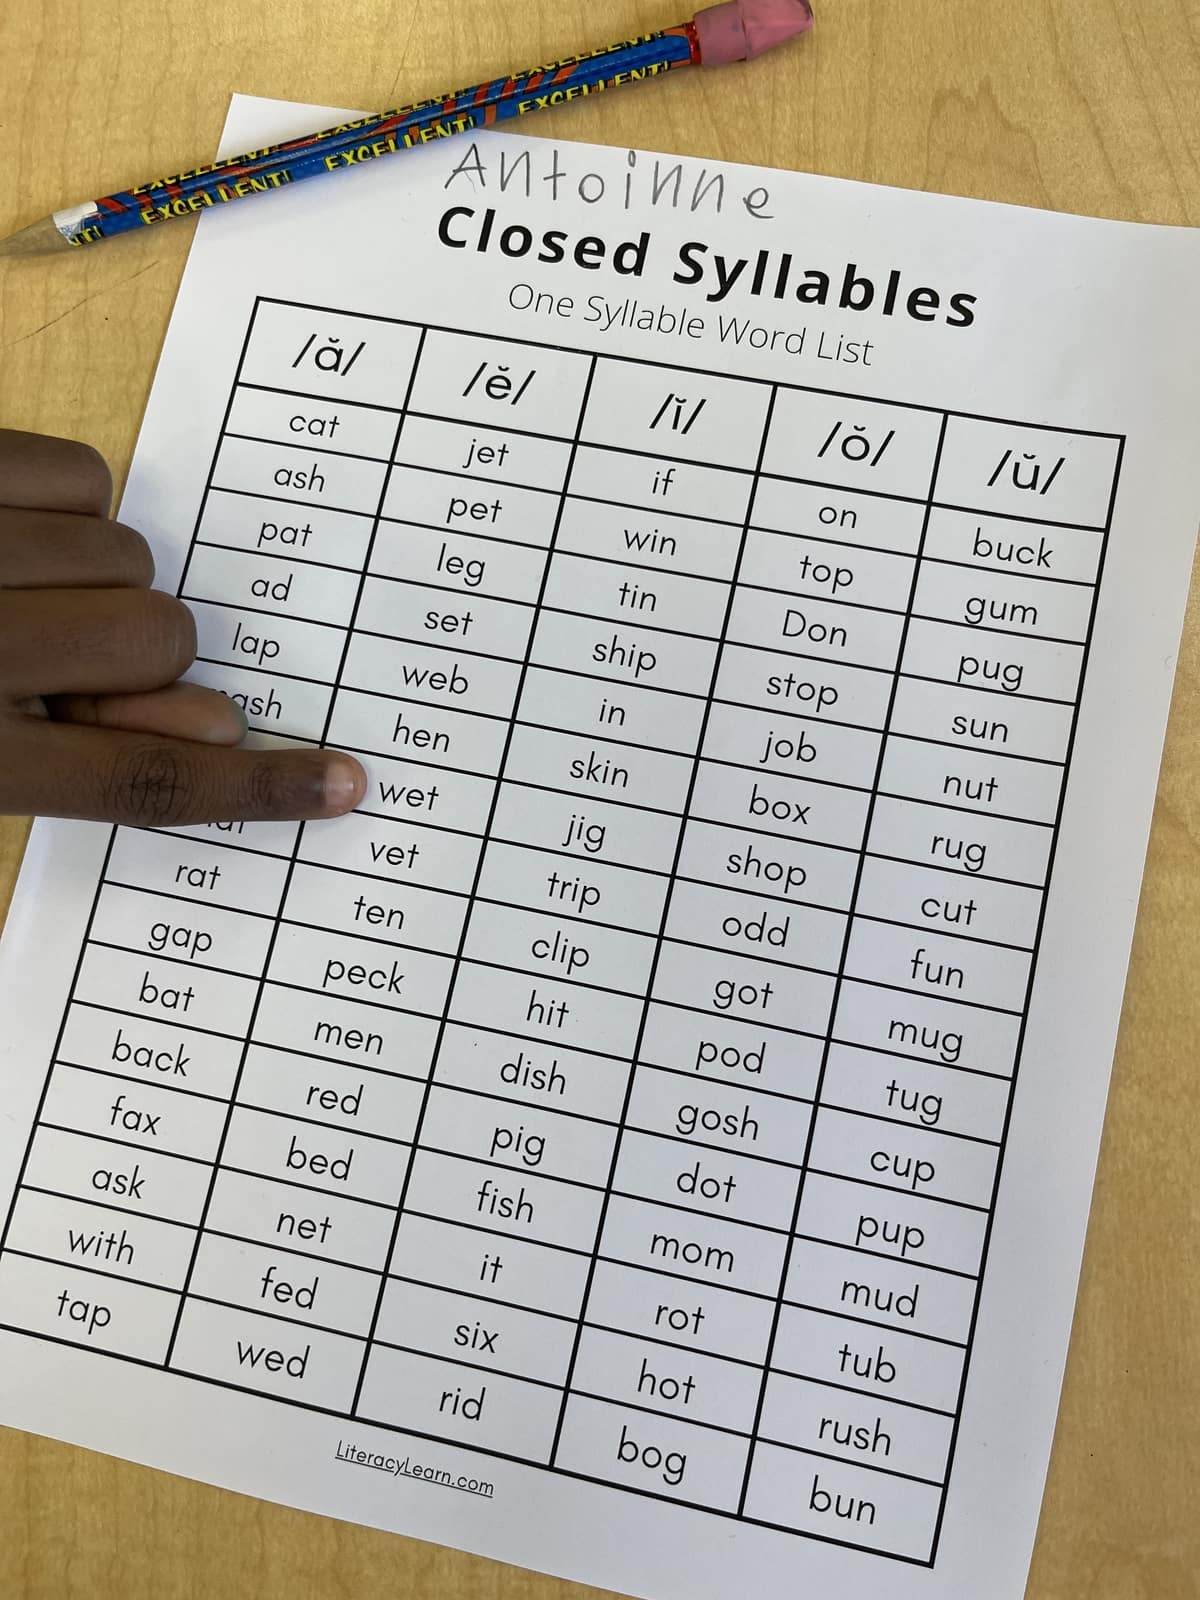 Photo of the closed syllable word list and pencil with a student pointing at words.